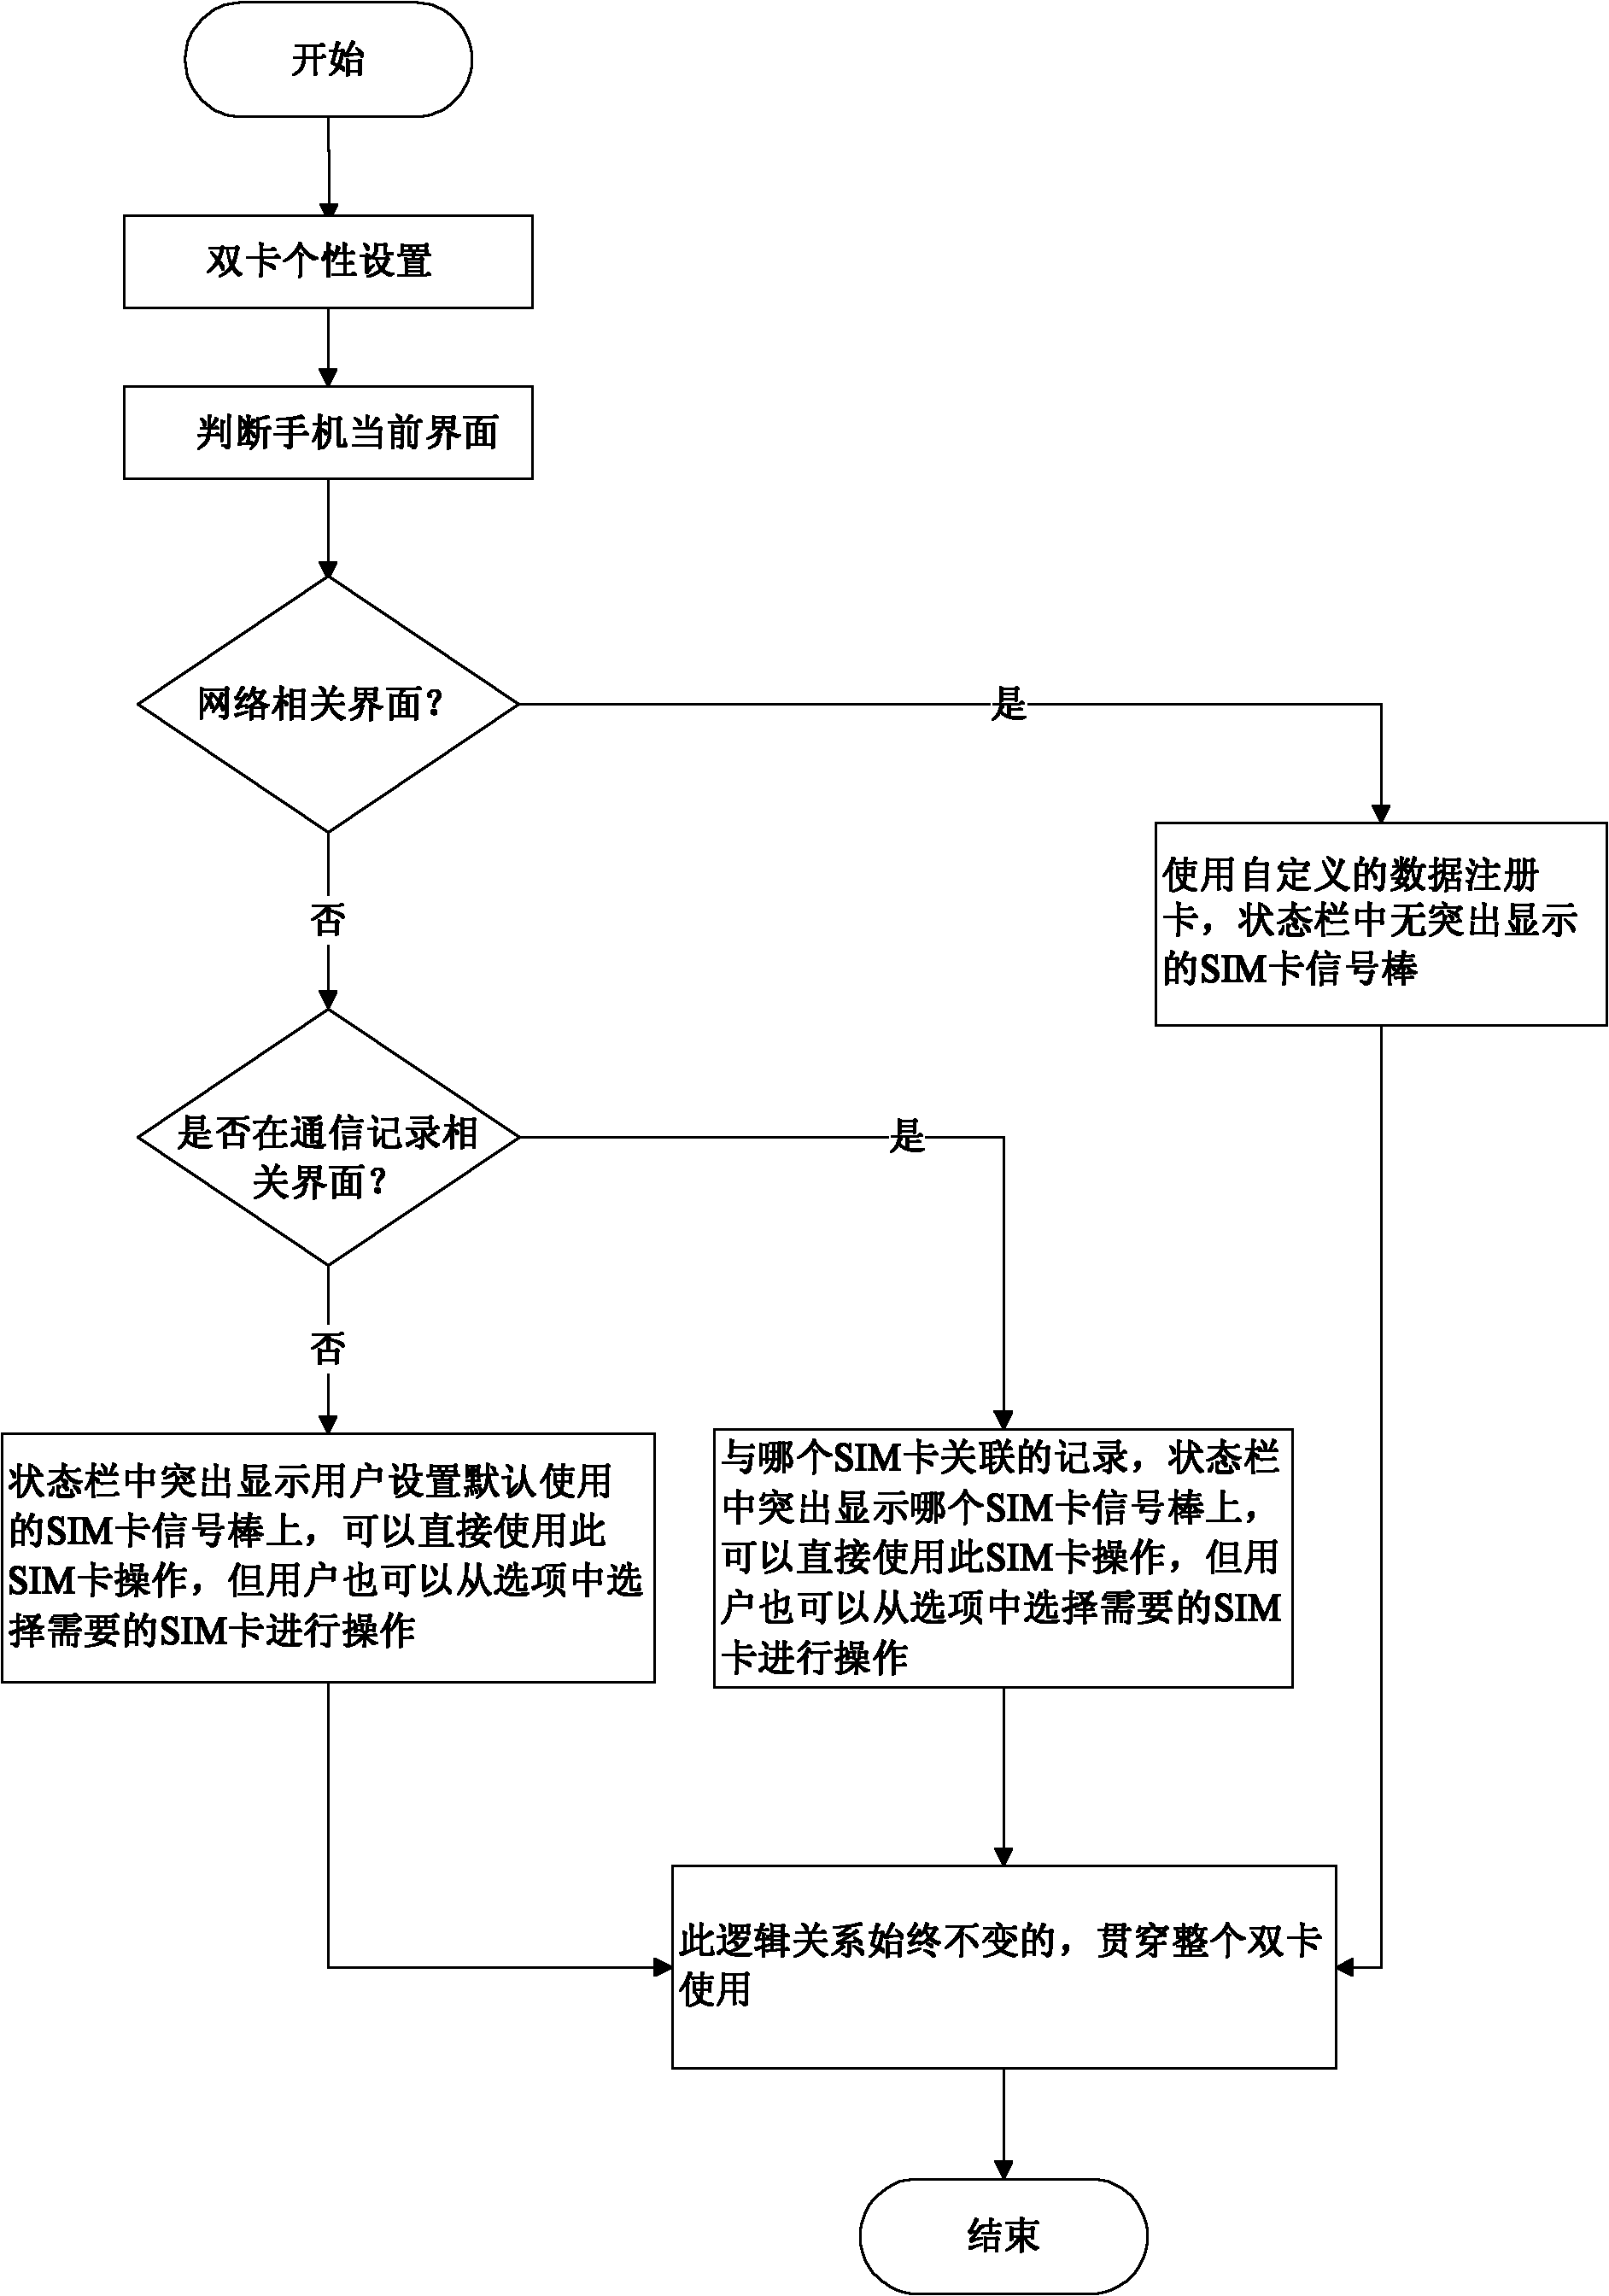 Application method for subscriber identity module (SIM) card of double-card single-dialing mobile phone